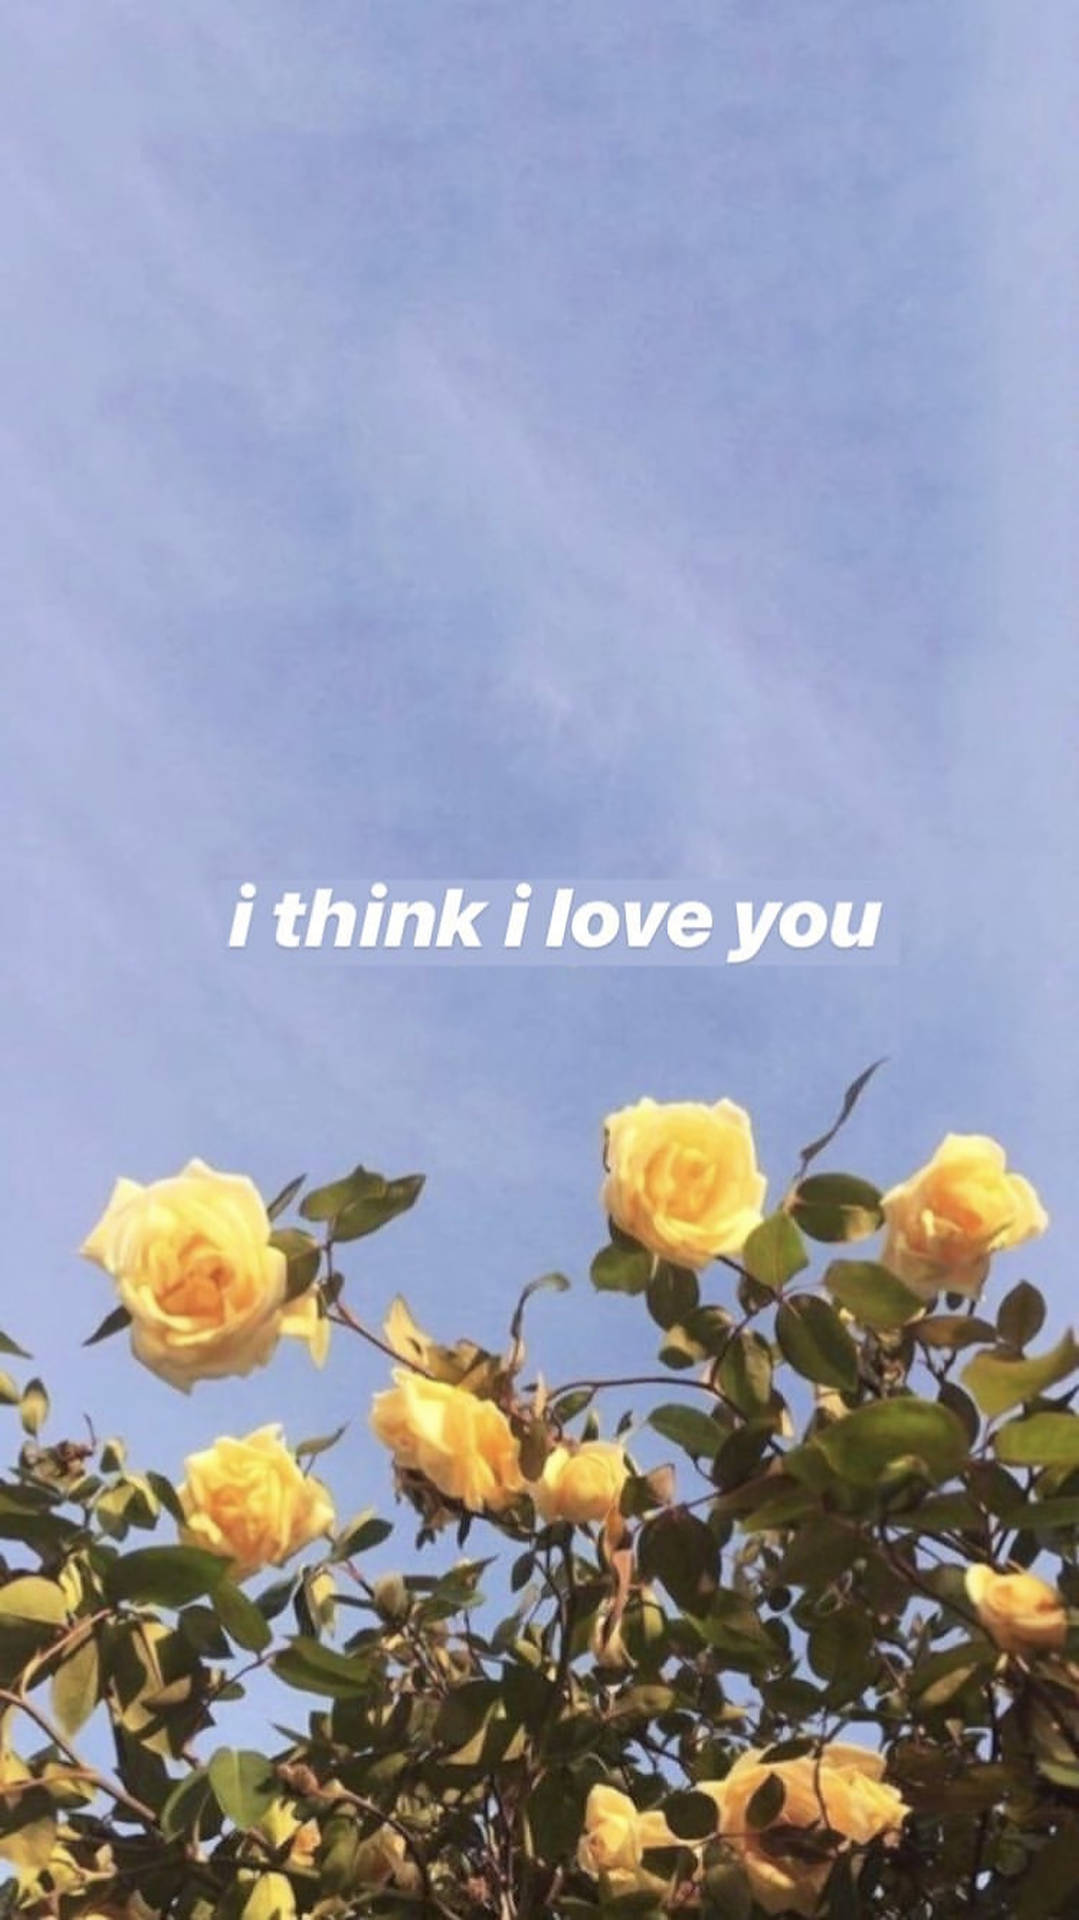 1500X2668 I Love You Wallpaper and Background